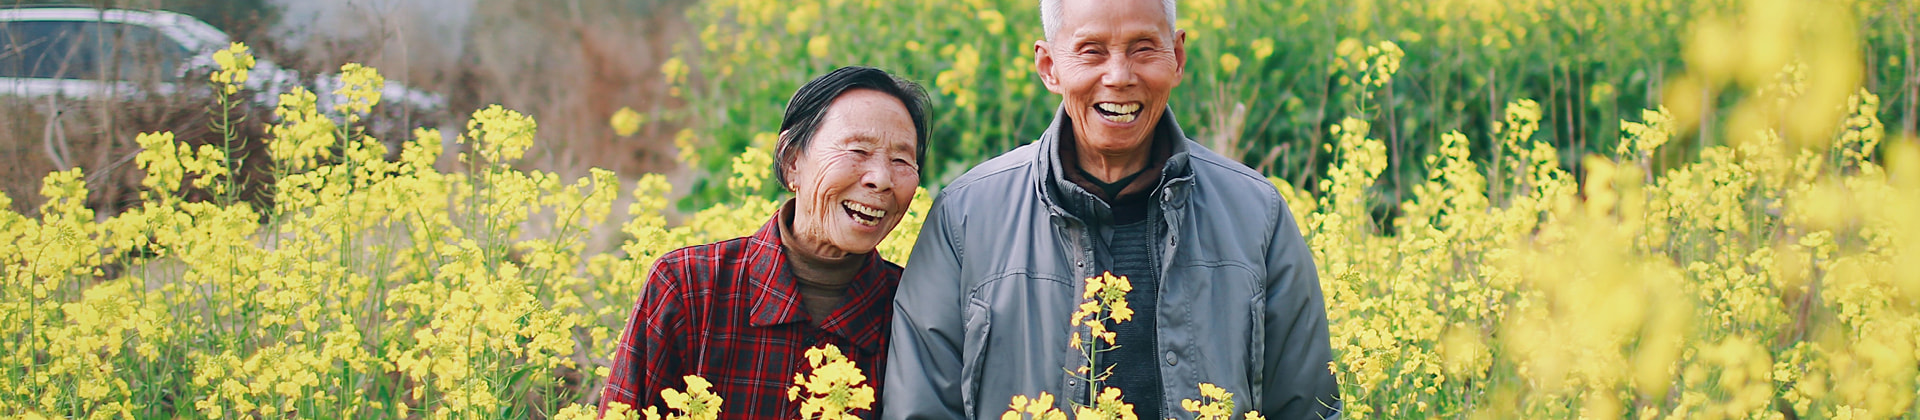 elderly couple smiling together in field 